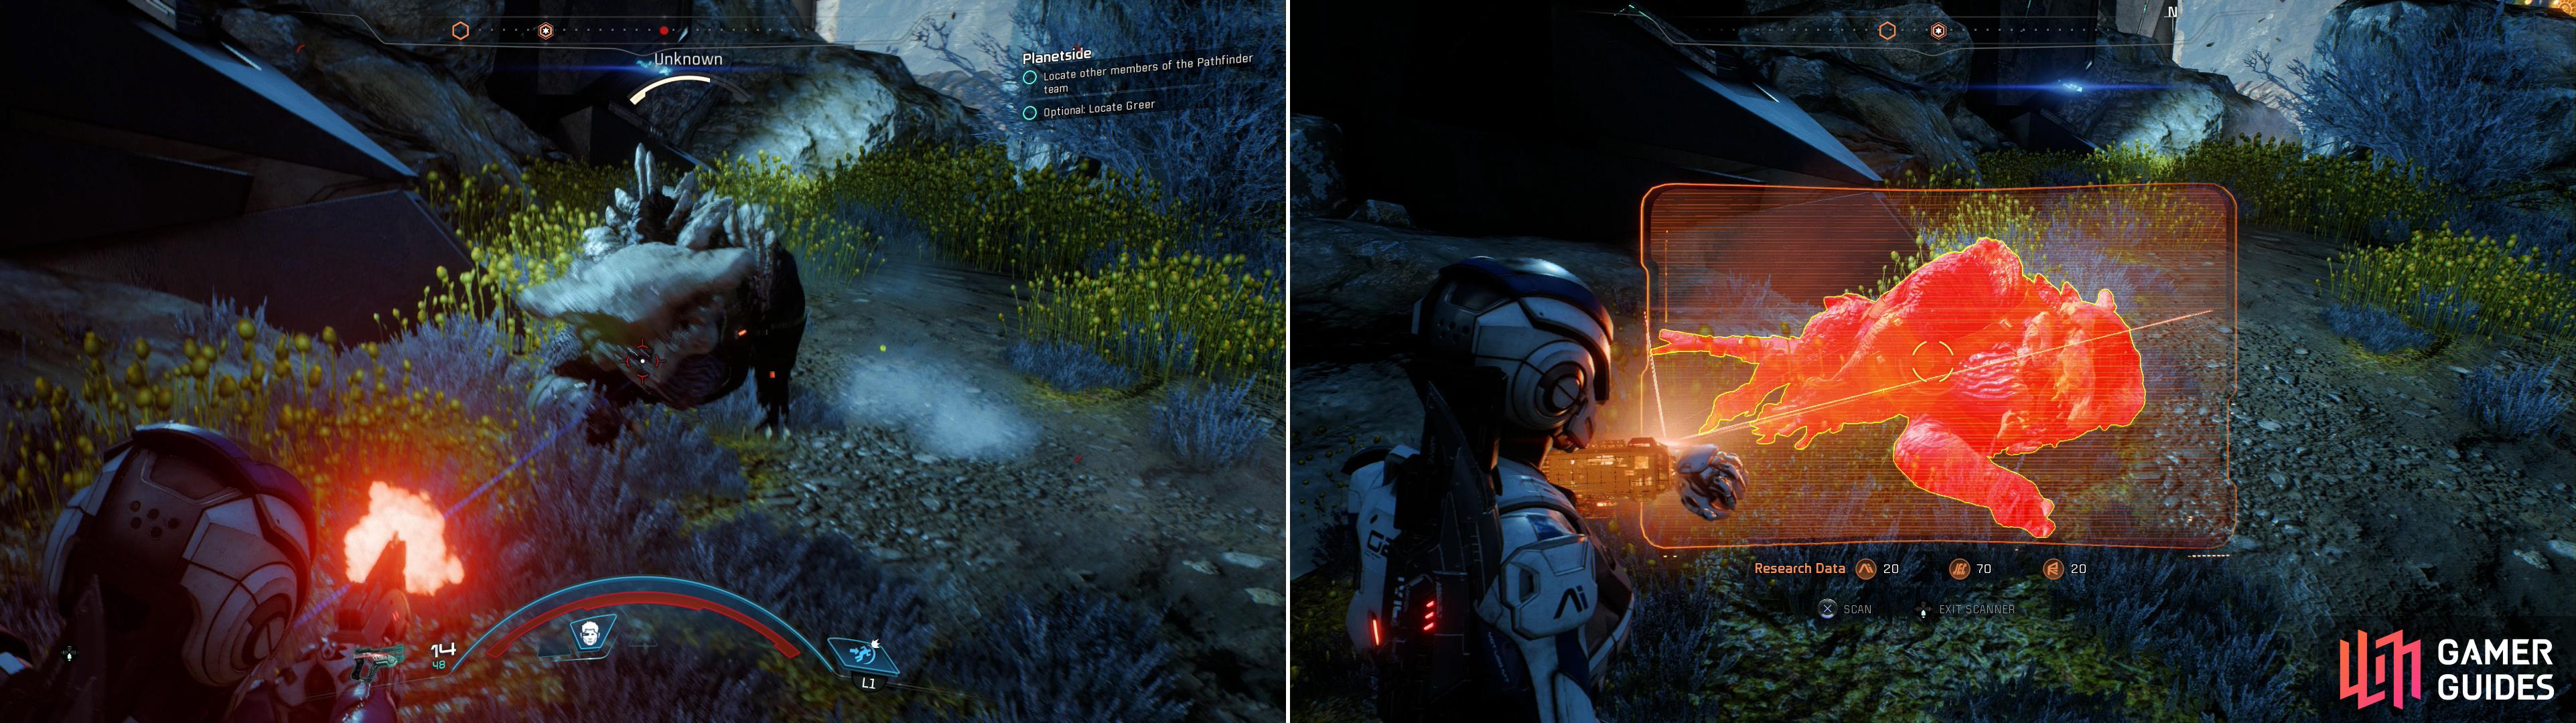 Be wary of a cloaked quadruped (left) which will attempt to ambush you. After its dead, be sure to scan it (right) for a great deal of Heleus Research Data.